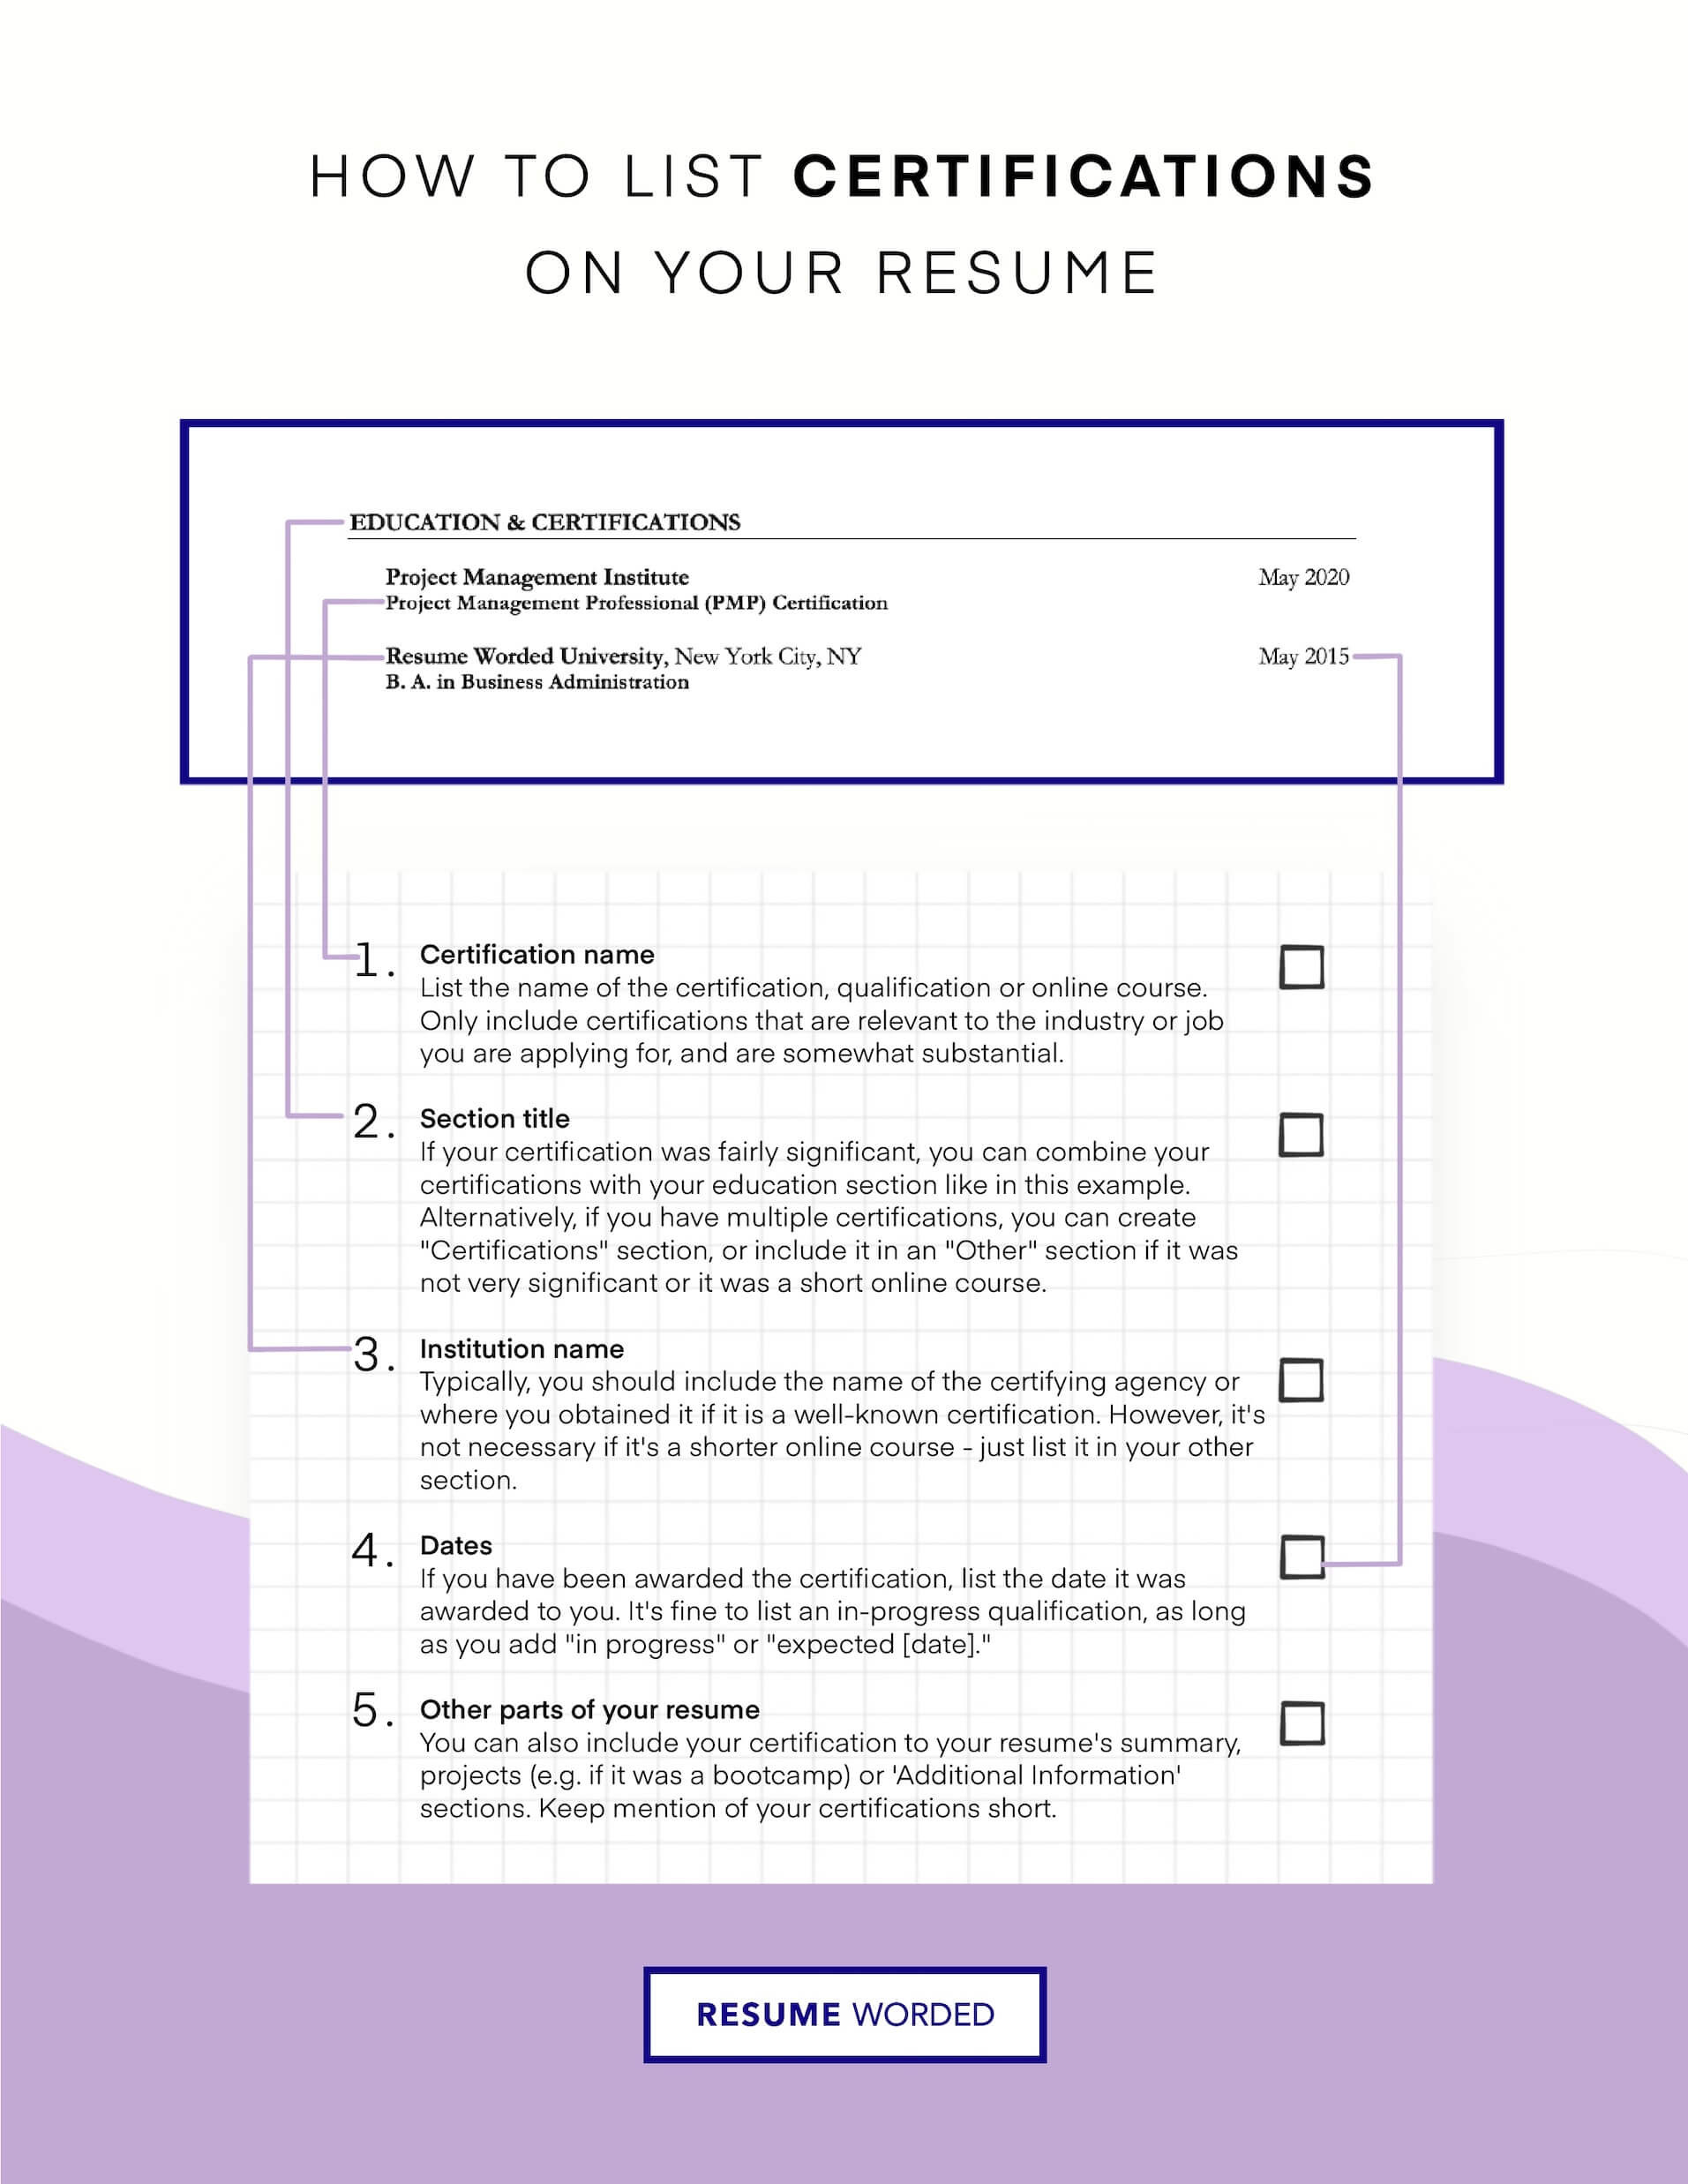 Training and Certification On Resume Sample the Right Way to List Certifications On A Resume (with Examples)